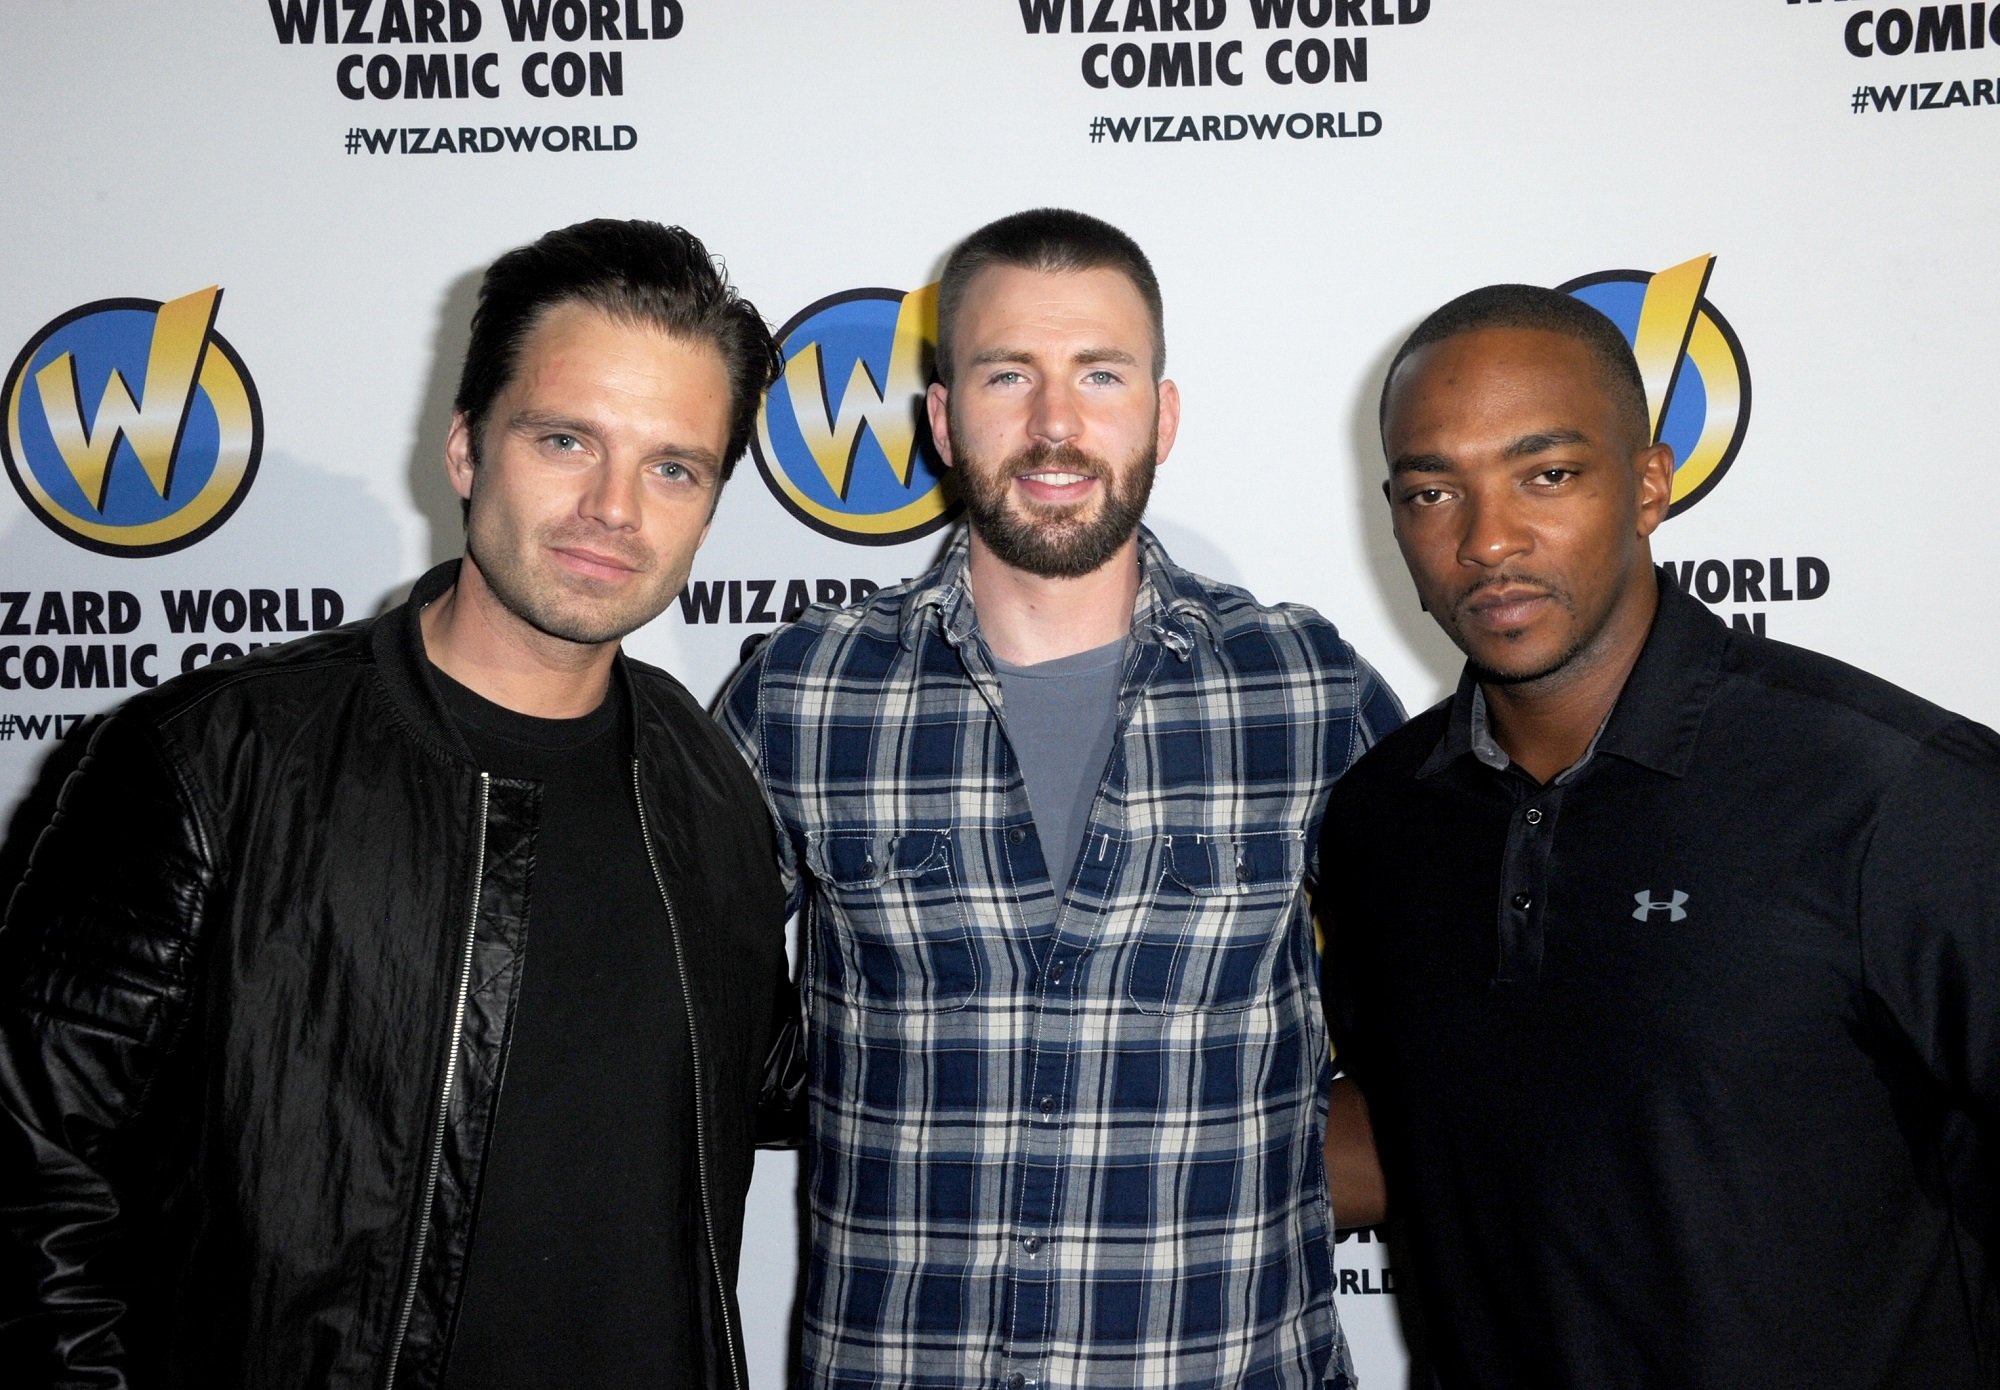 Sebastian Stan, Chris Evans, and Anthony Mackie pose together during day 3 of Wizard World Comic Con Philadelphia 2016